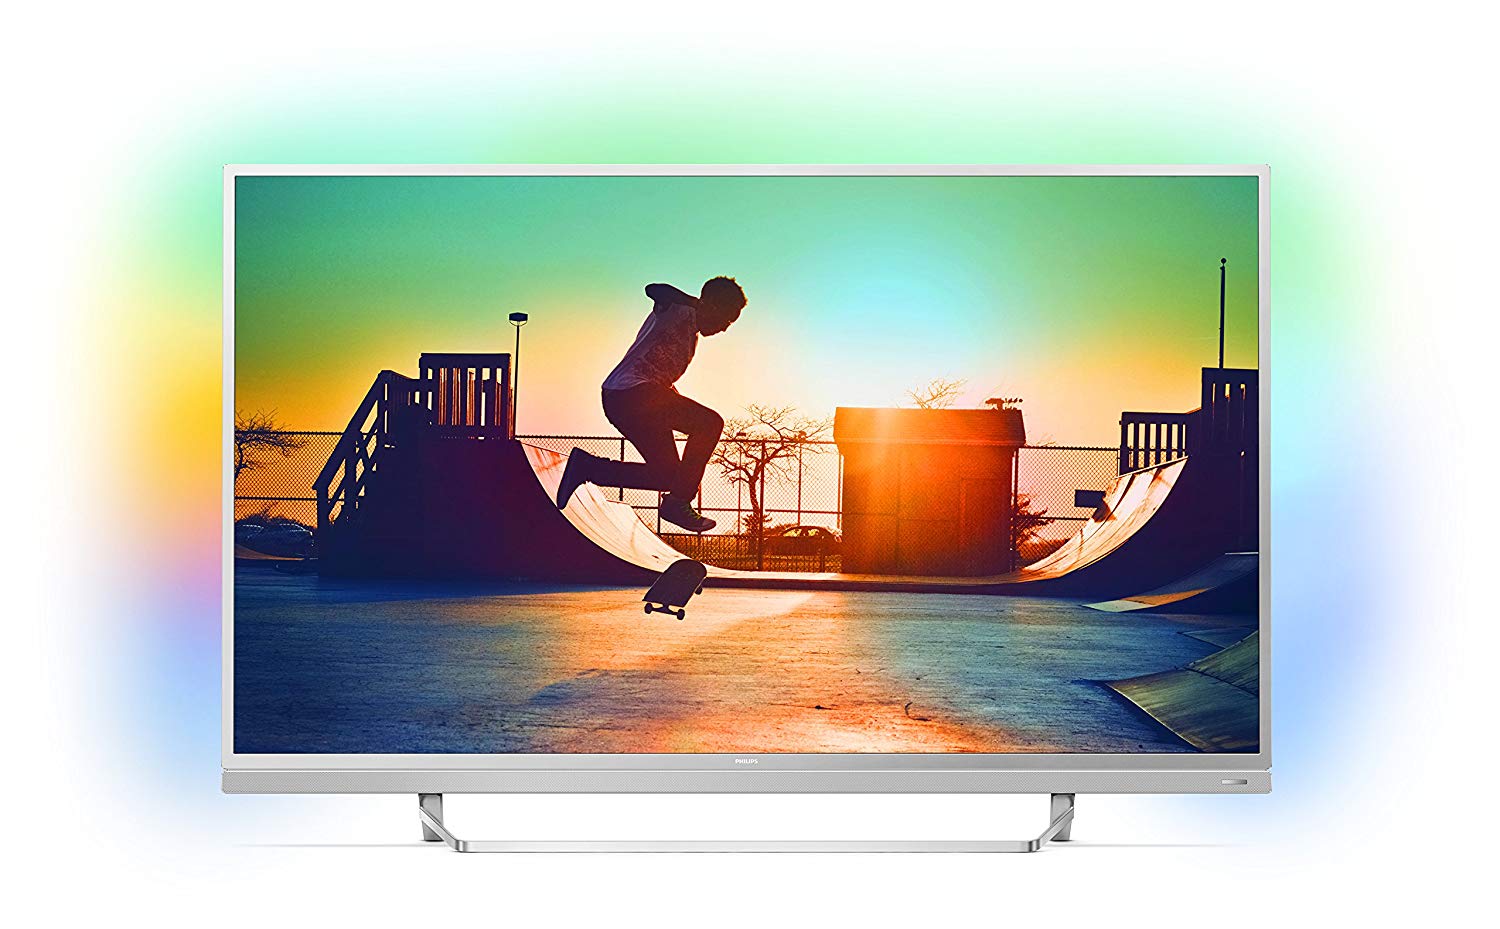 TV LED 49" Philips 4K Ultra HD, Smart TV, Android desde 412€